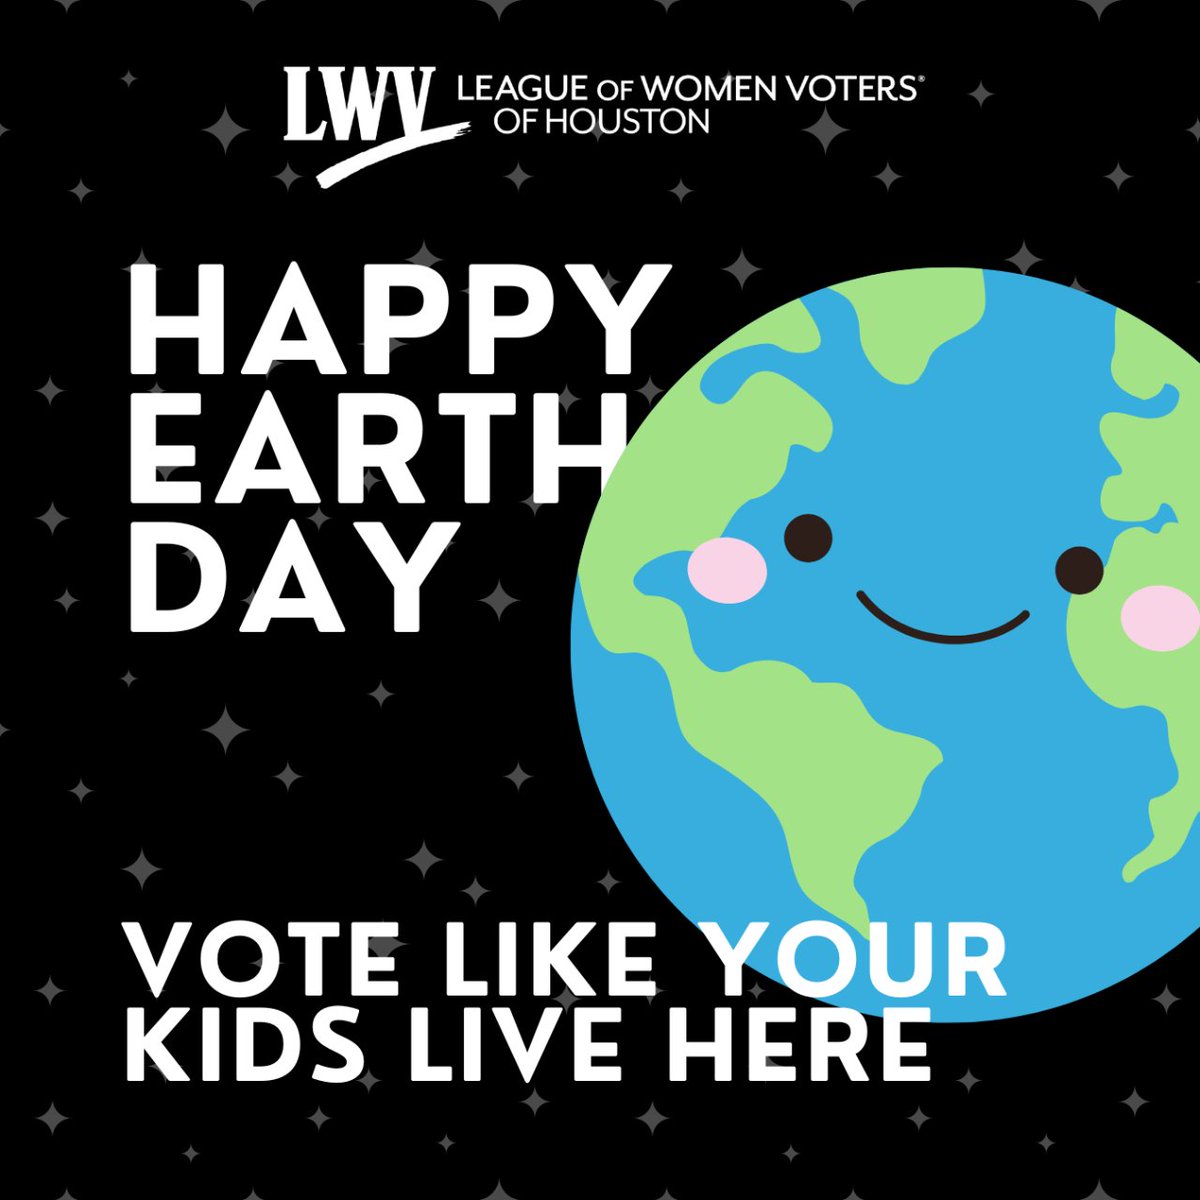 It's a beautiful day to get outside and enjoy Earth Day! 🌎 #lwvhouston #houstonvoter #harrisvotes #earthday